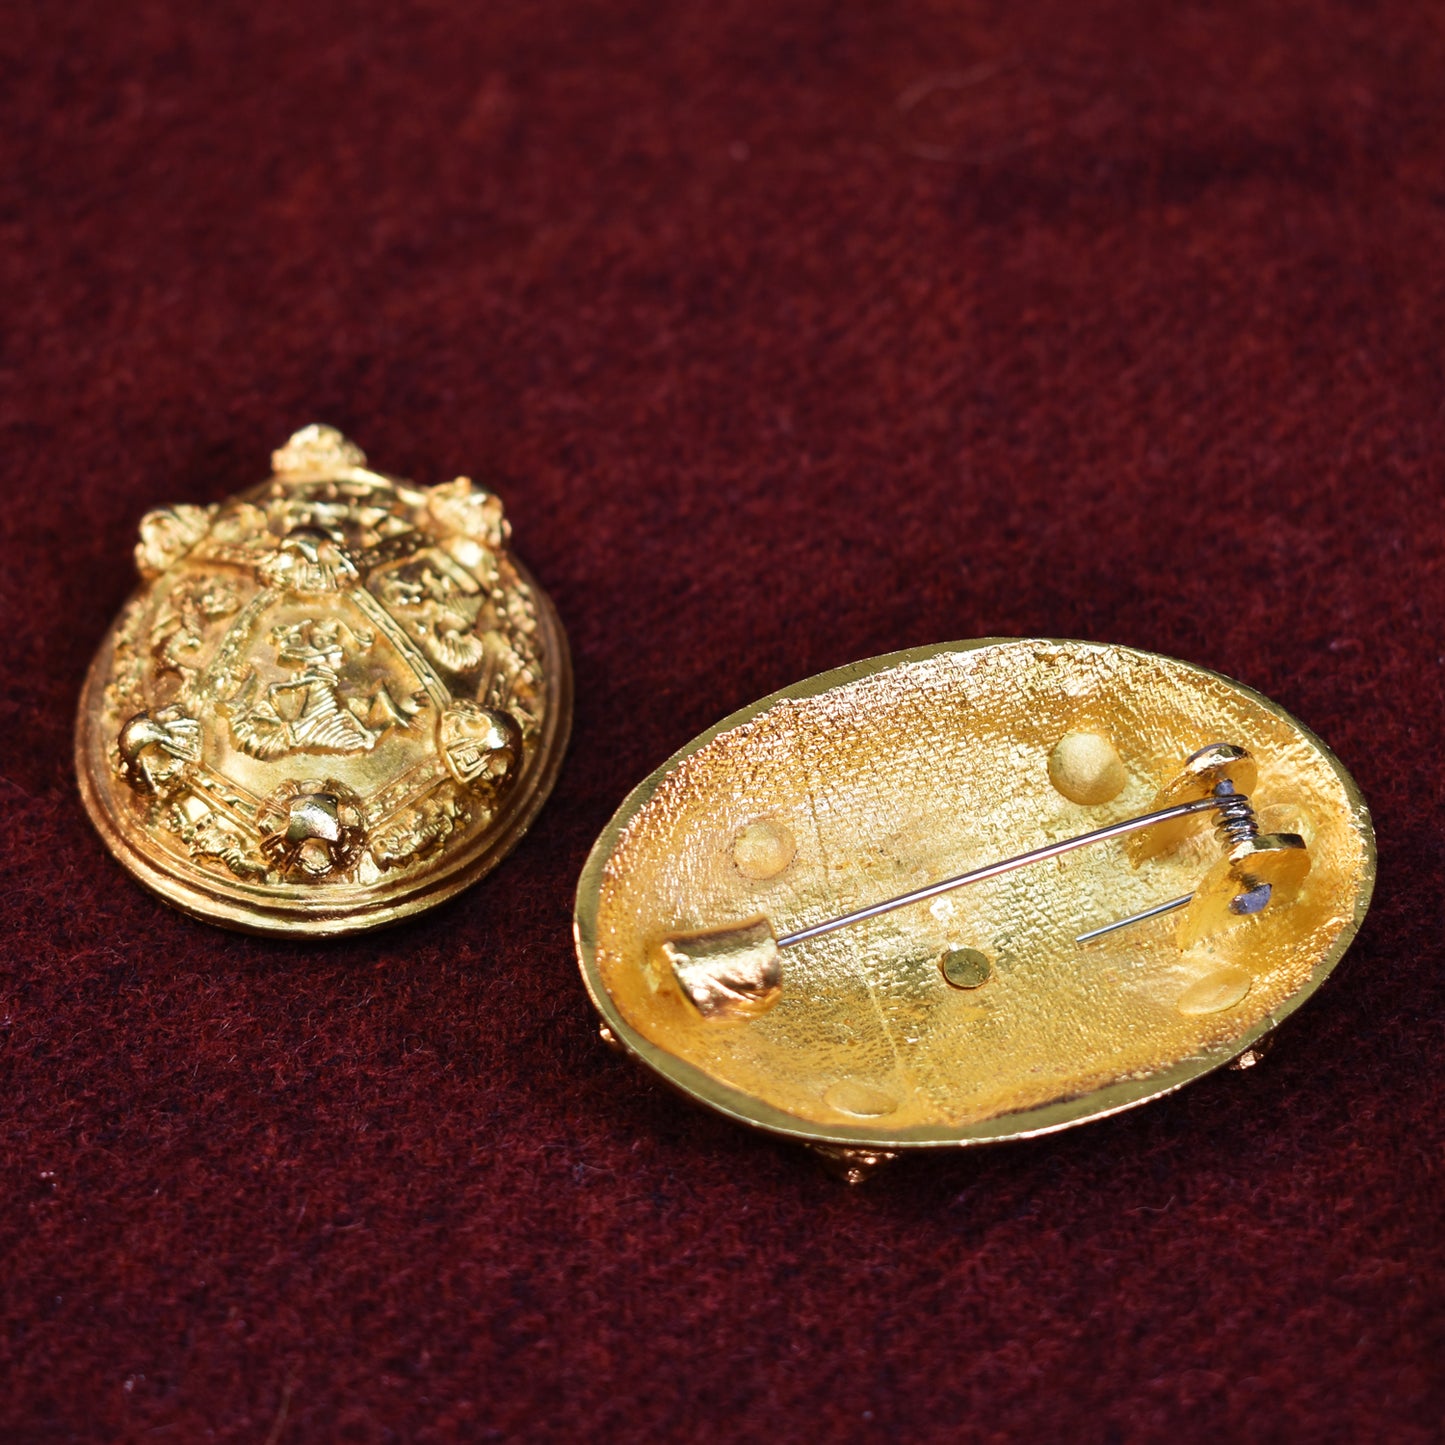 Pair of Tortoise Brooches - Gold Plated